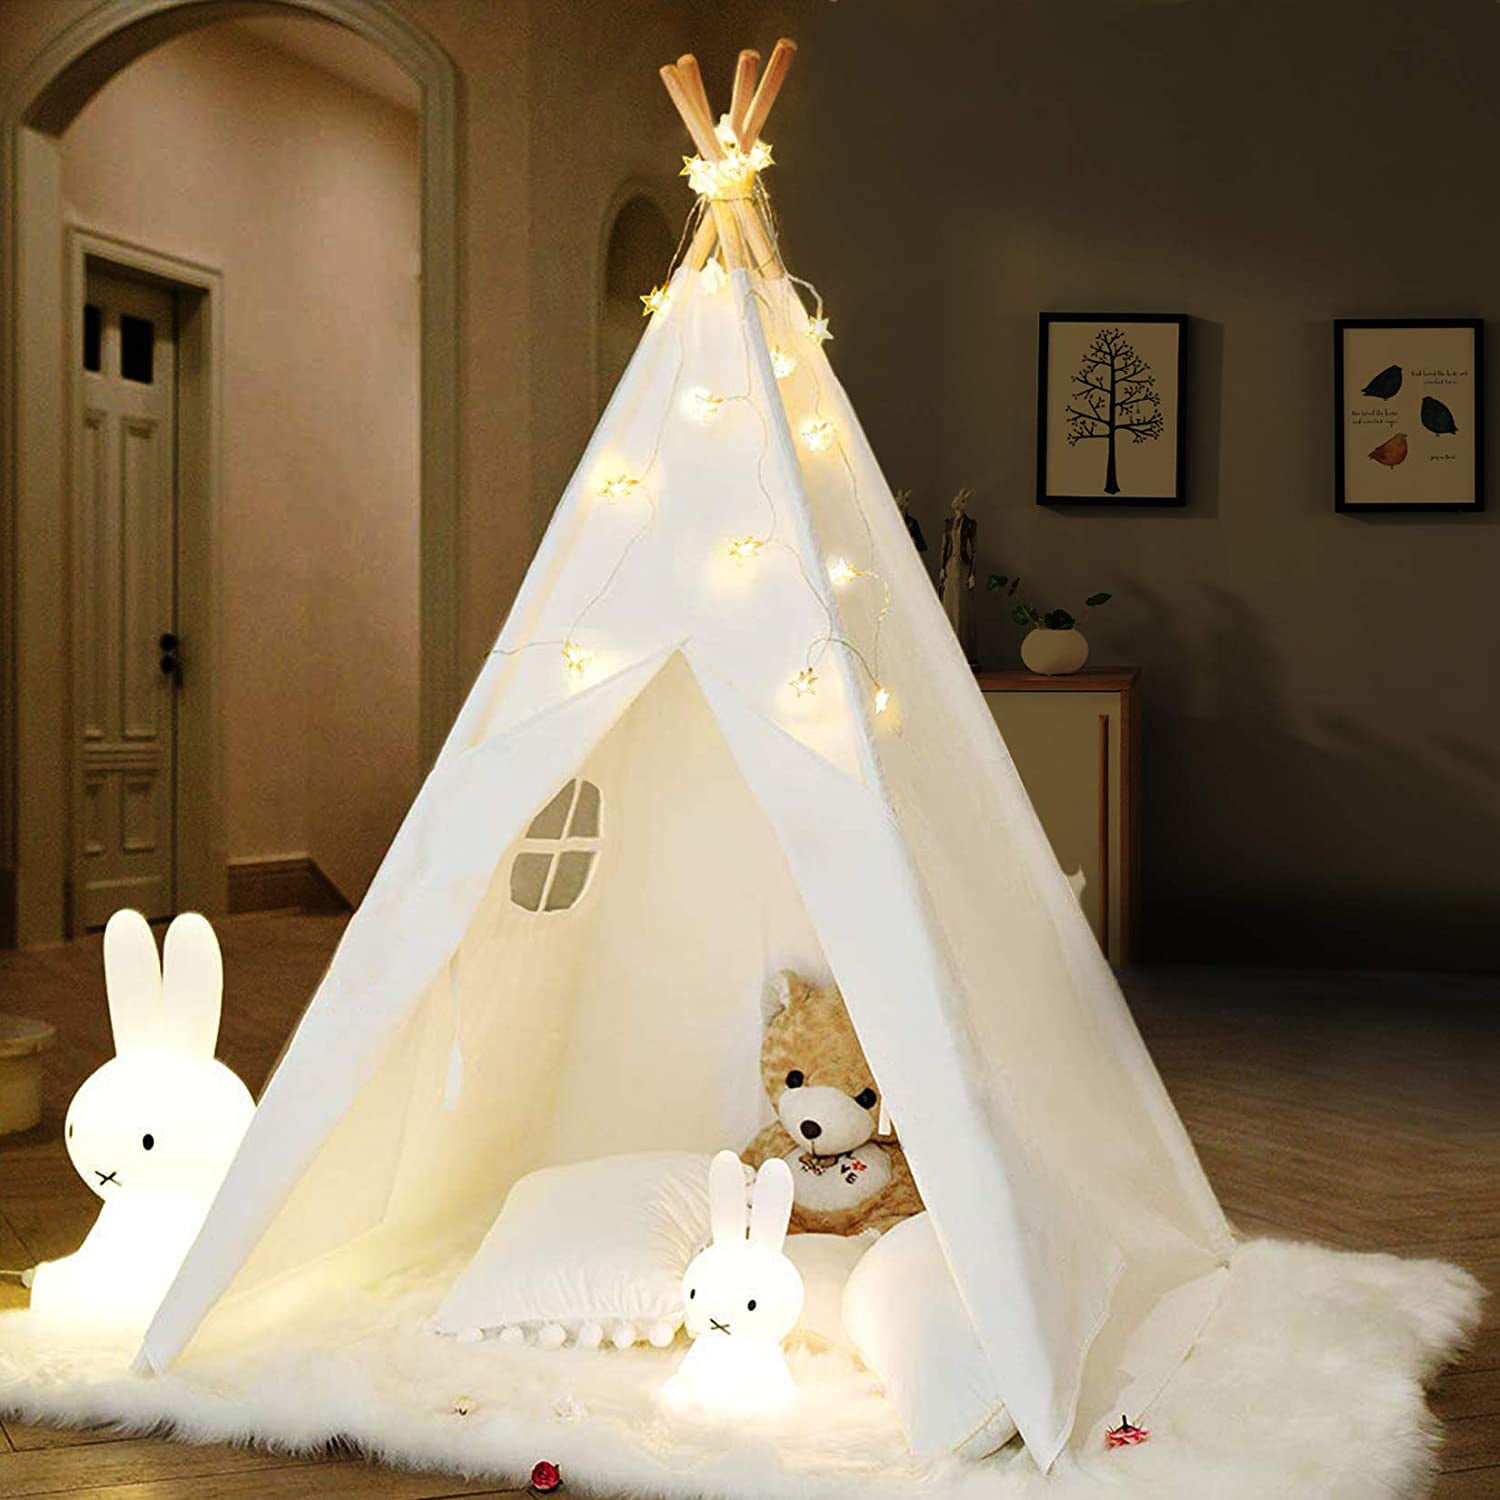 Natural Cotton Play Tent Kids Teepee Playhouse Toddlers Fun with LED Lights 